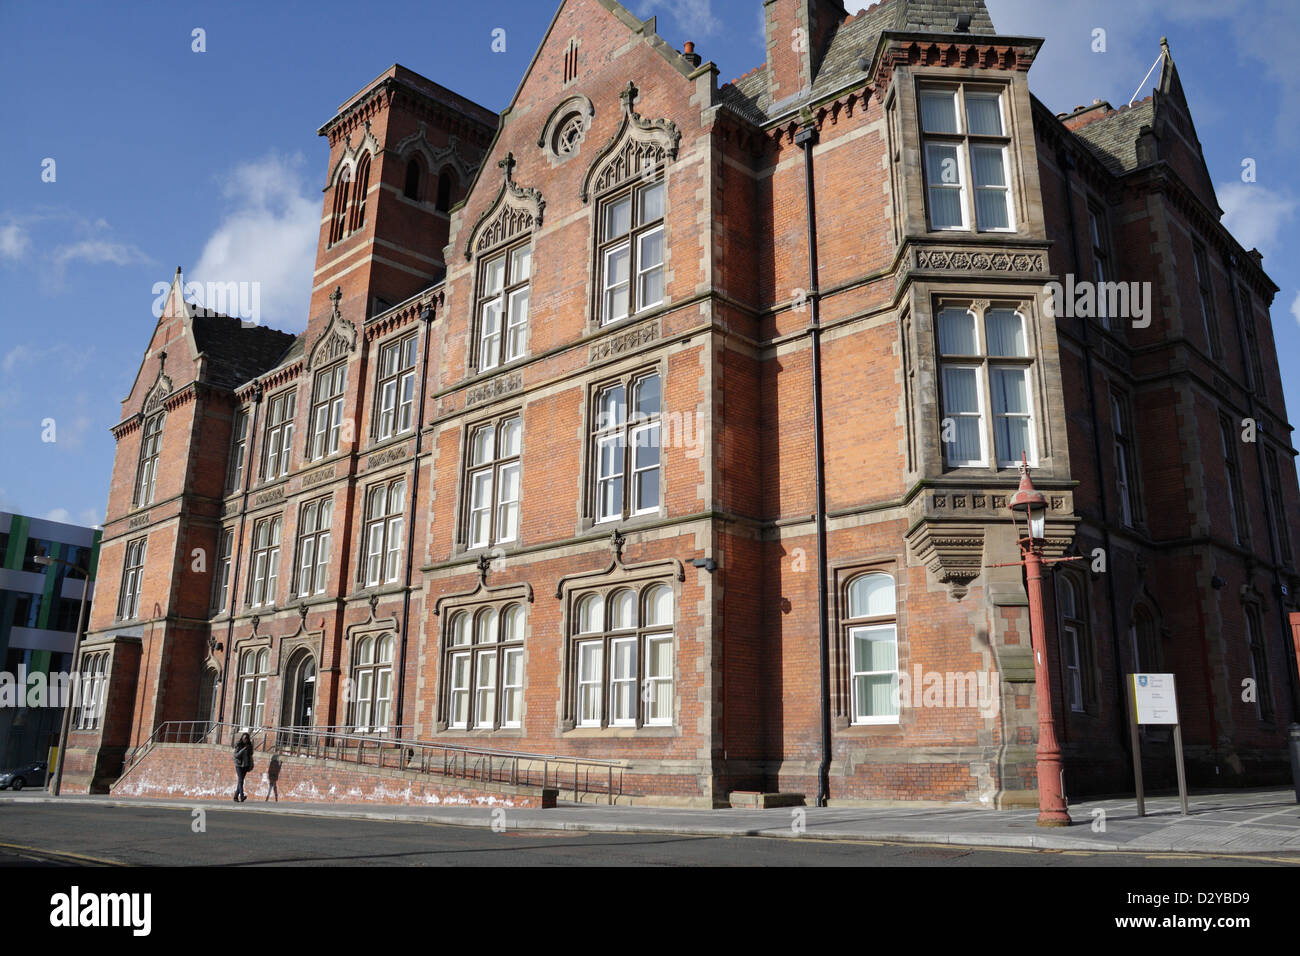 The Victorian wing and entrance of the former Jessop Hospital, now the Music dept, University of Sheffield England. Higher education and learning Stock Photo